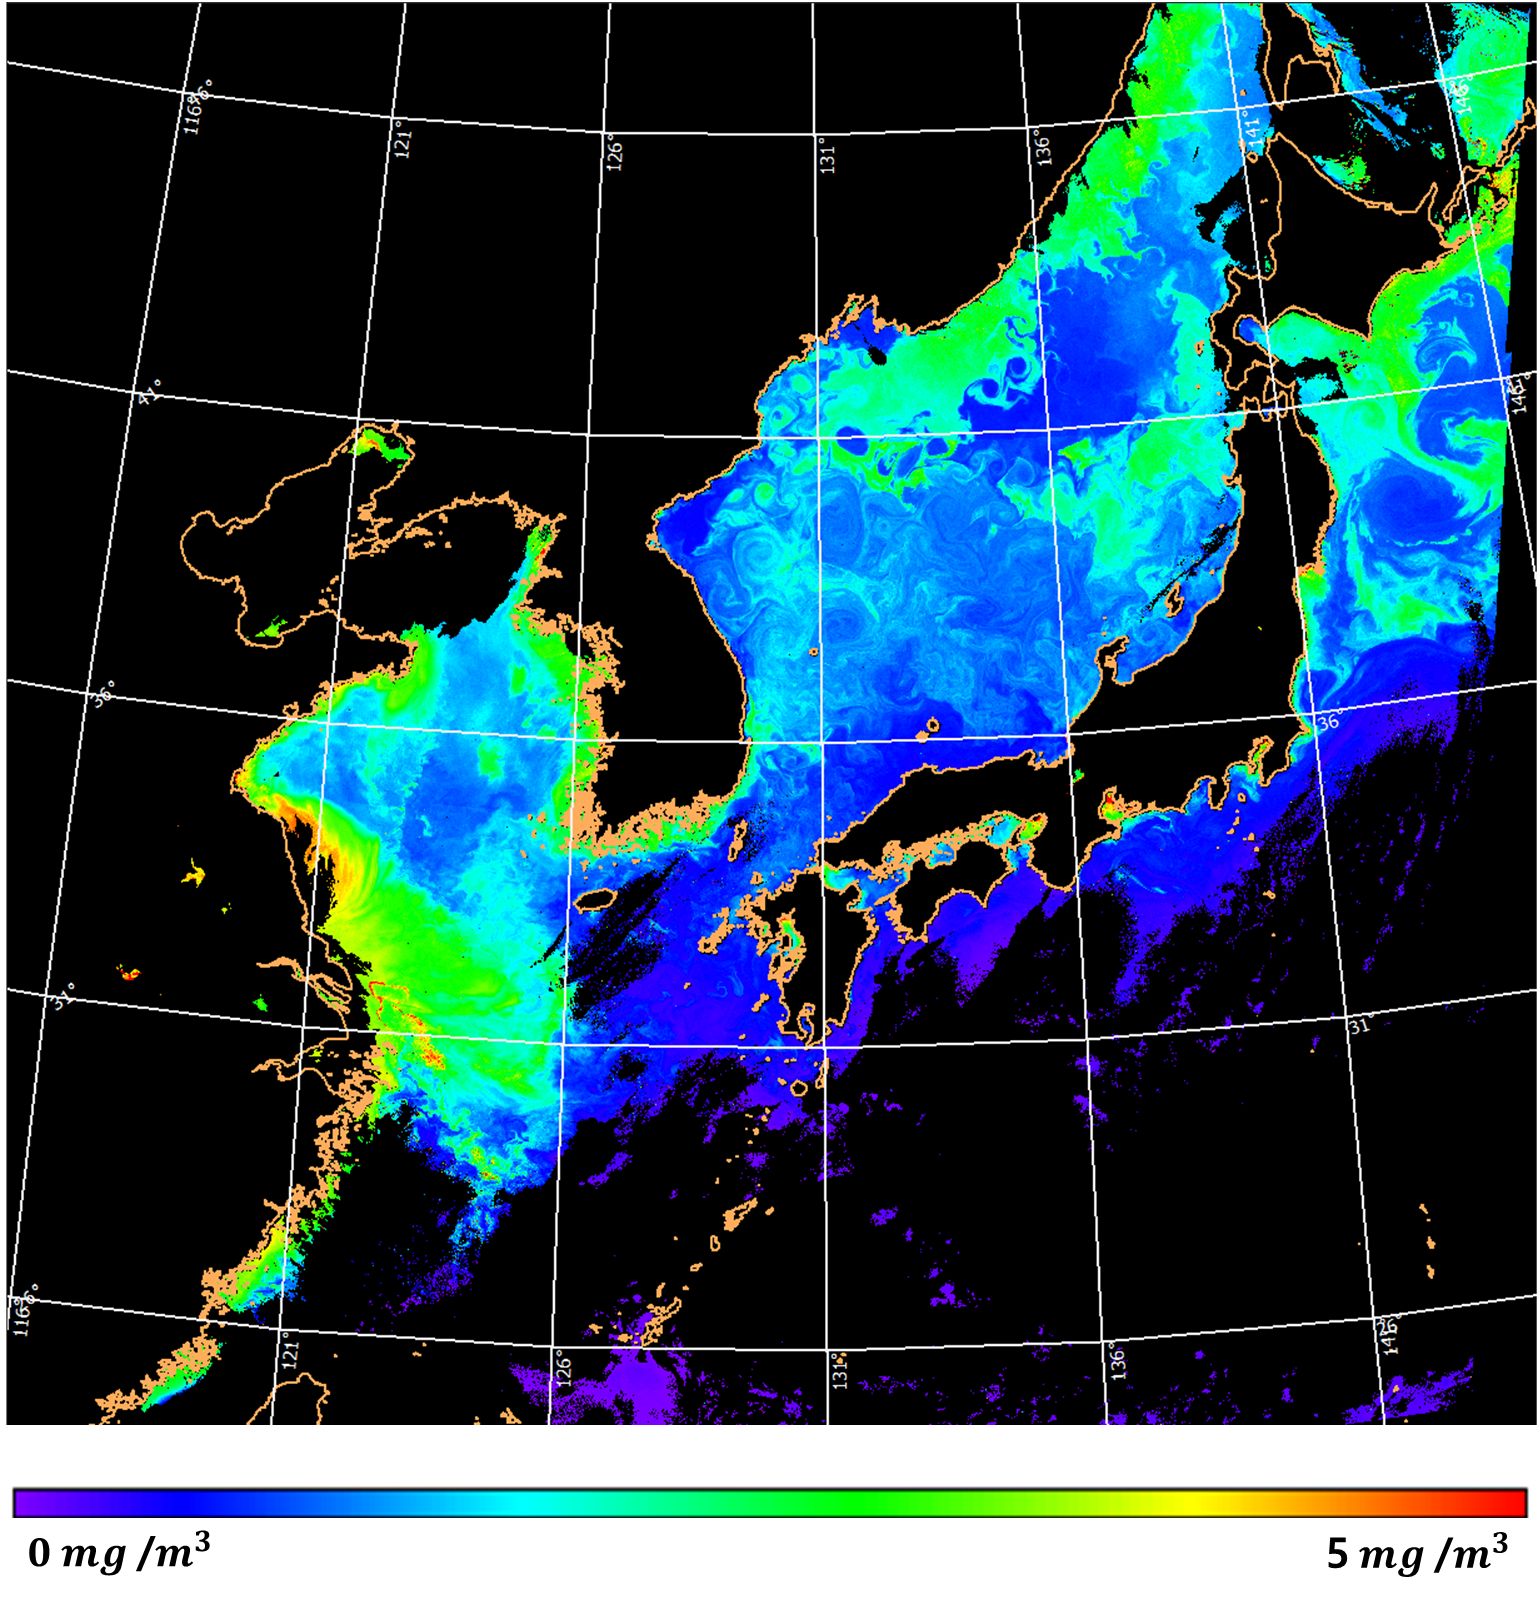 【Photo 2. Chlorophyll concentration analysis conducted by the Cheollian Geostationary Ocean Color Imager】